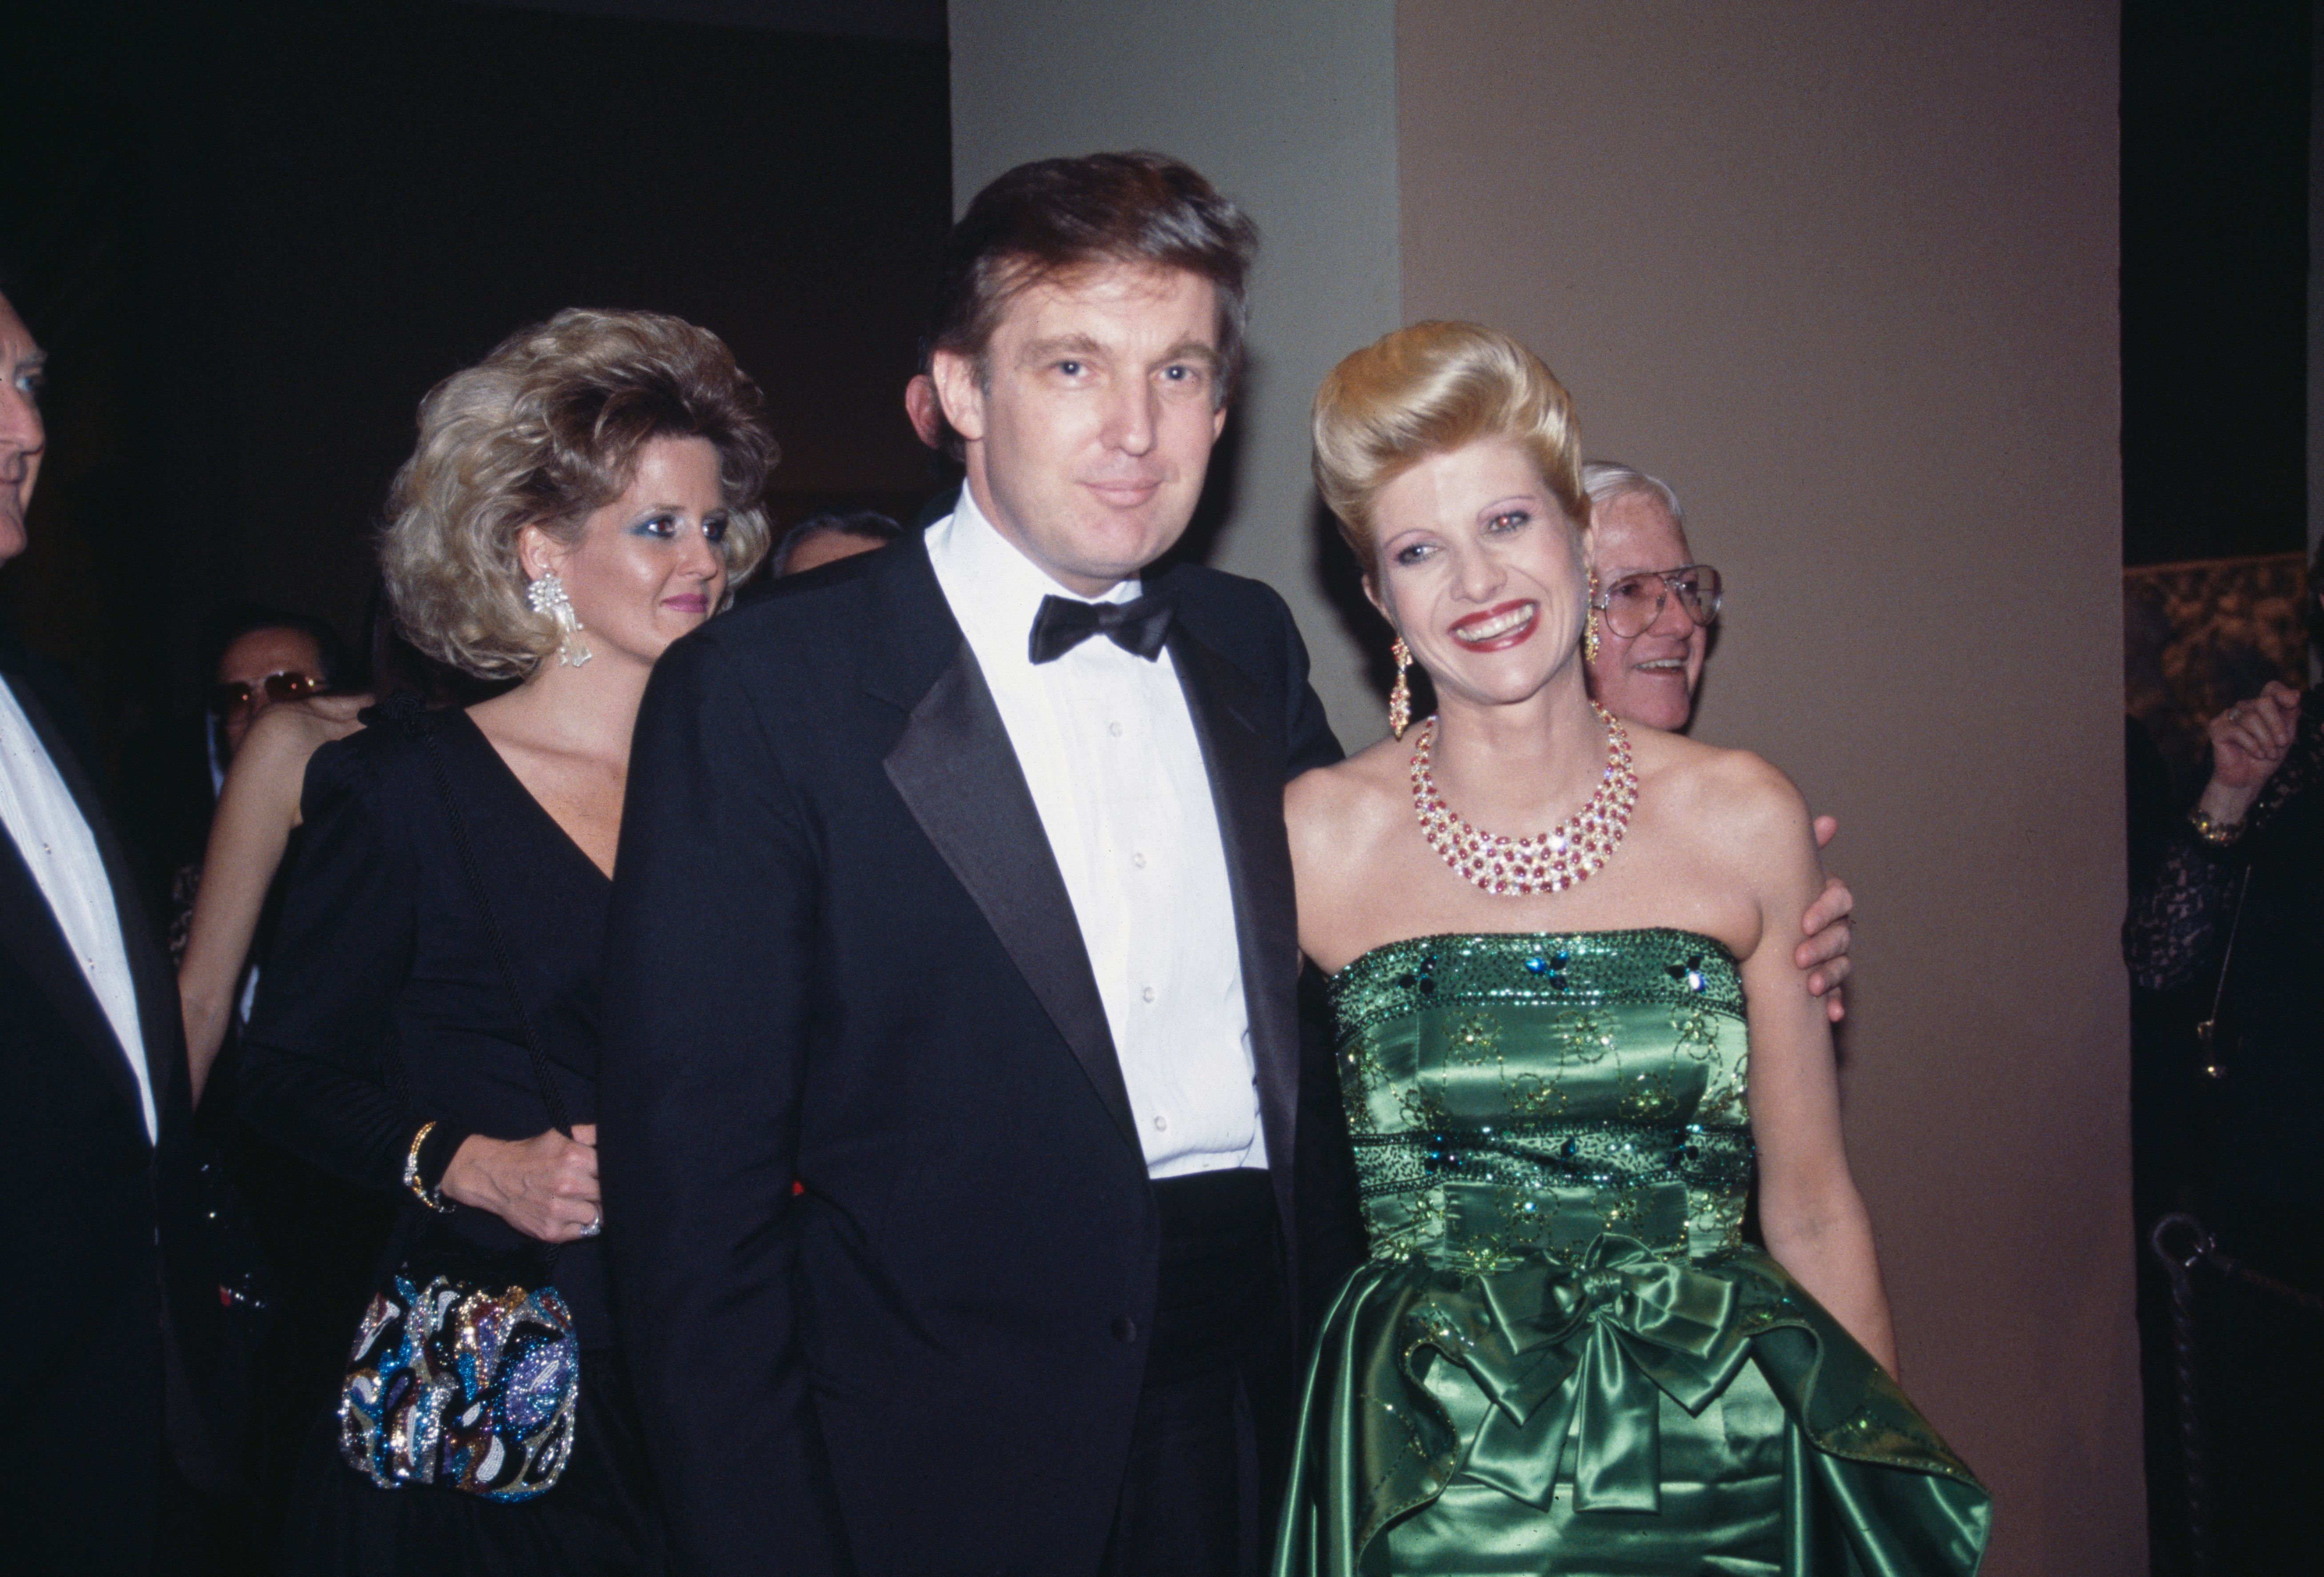 Donald Trump with Ivana Trump at the annual dinner dance of the Costume Institute, held at the Metropolitan Museum of Art in 1987 in New York City | Photo: Tom Gates/Pictorial Parade/Archive Photos/Getty Images